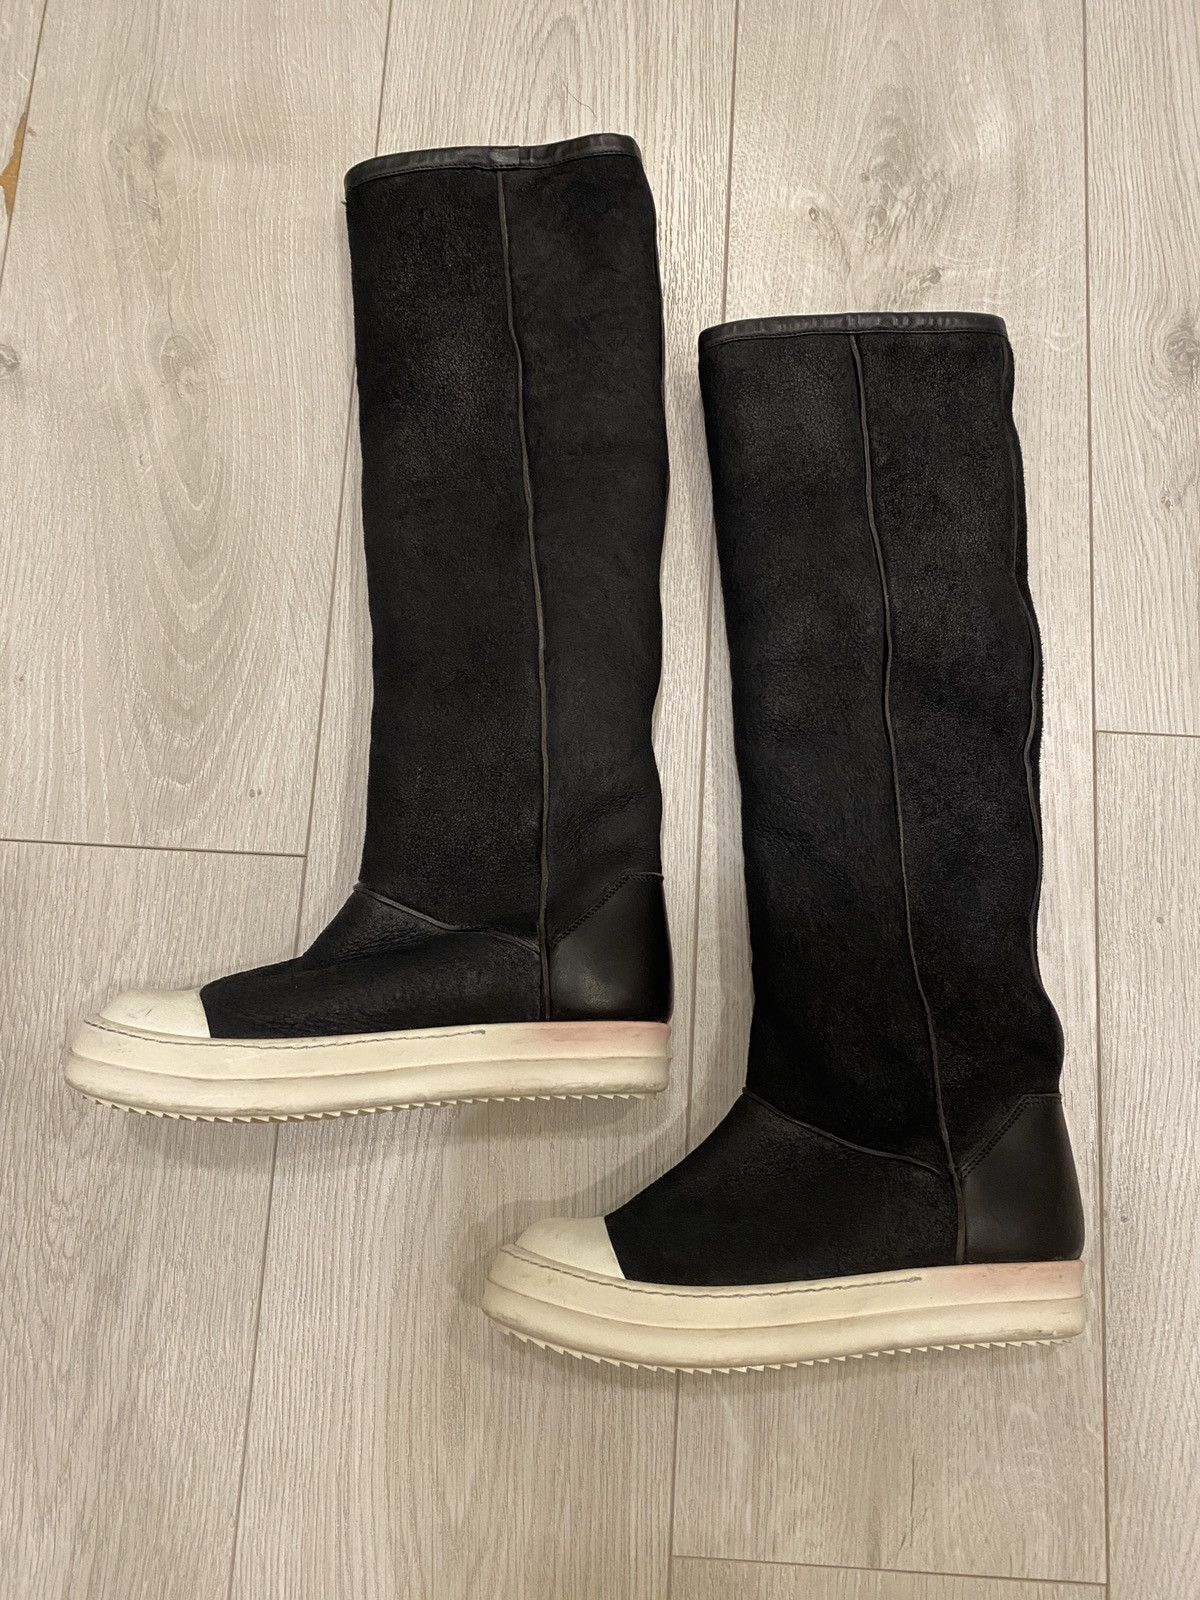 Rick Owens Rick Owens Fw14 moody tall boots | Grailed